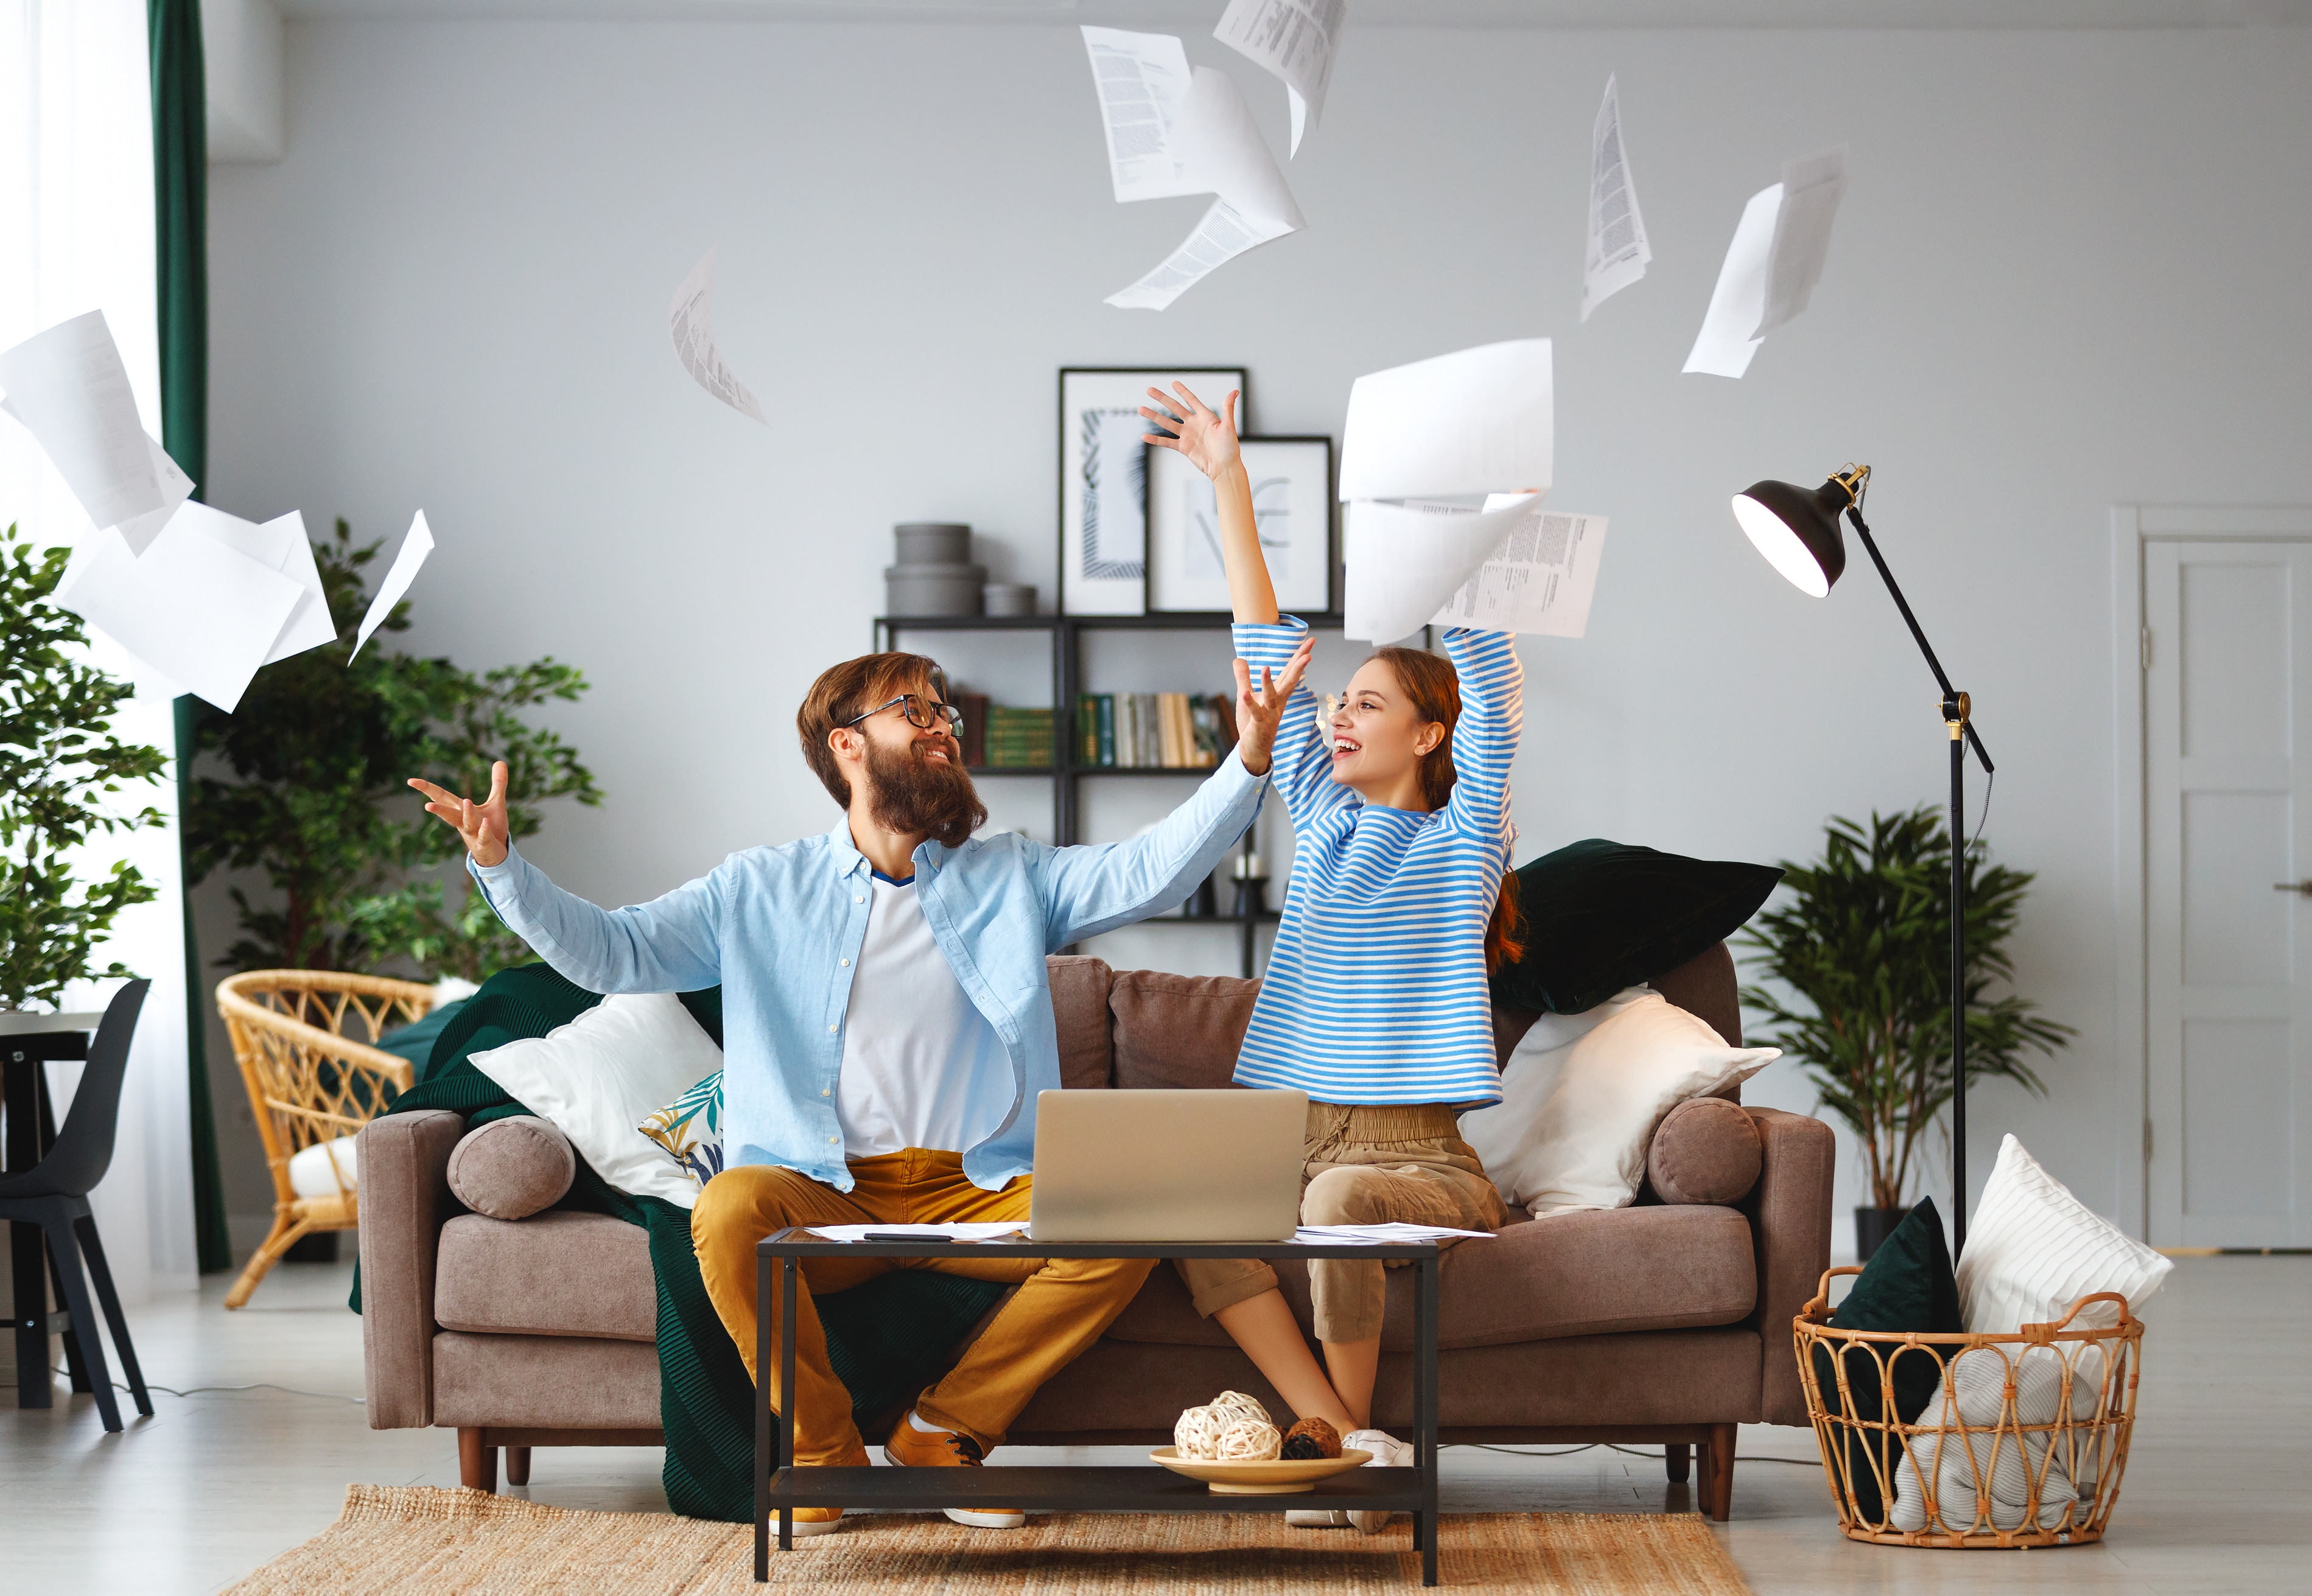 Excited couple throwing documents in the air after engaging in debt relief.